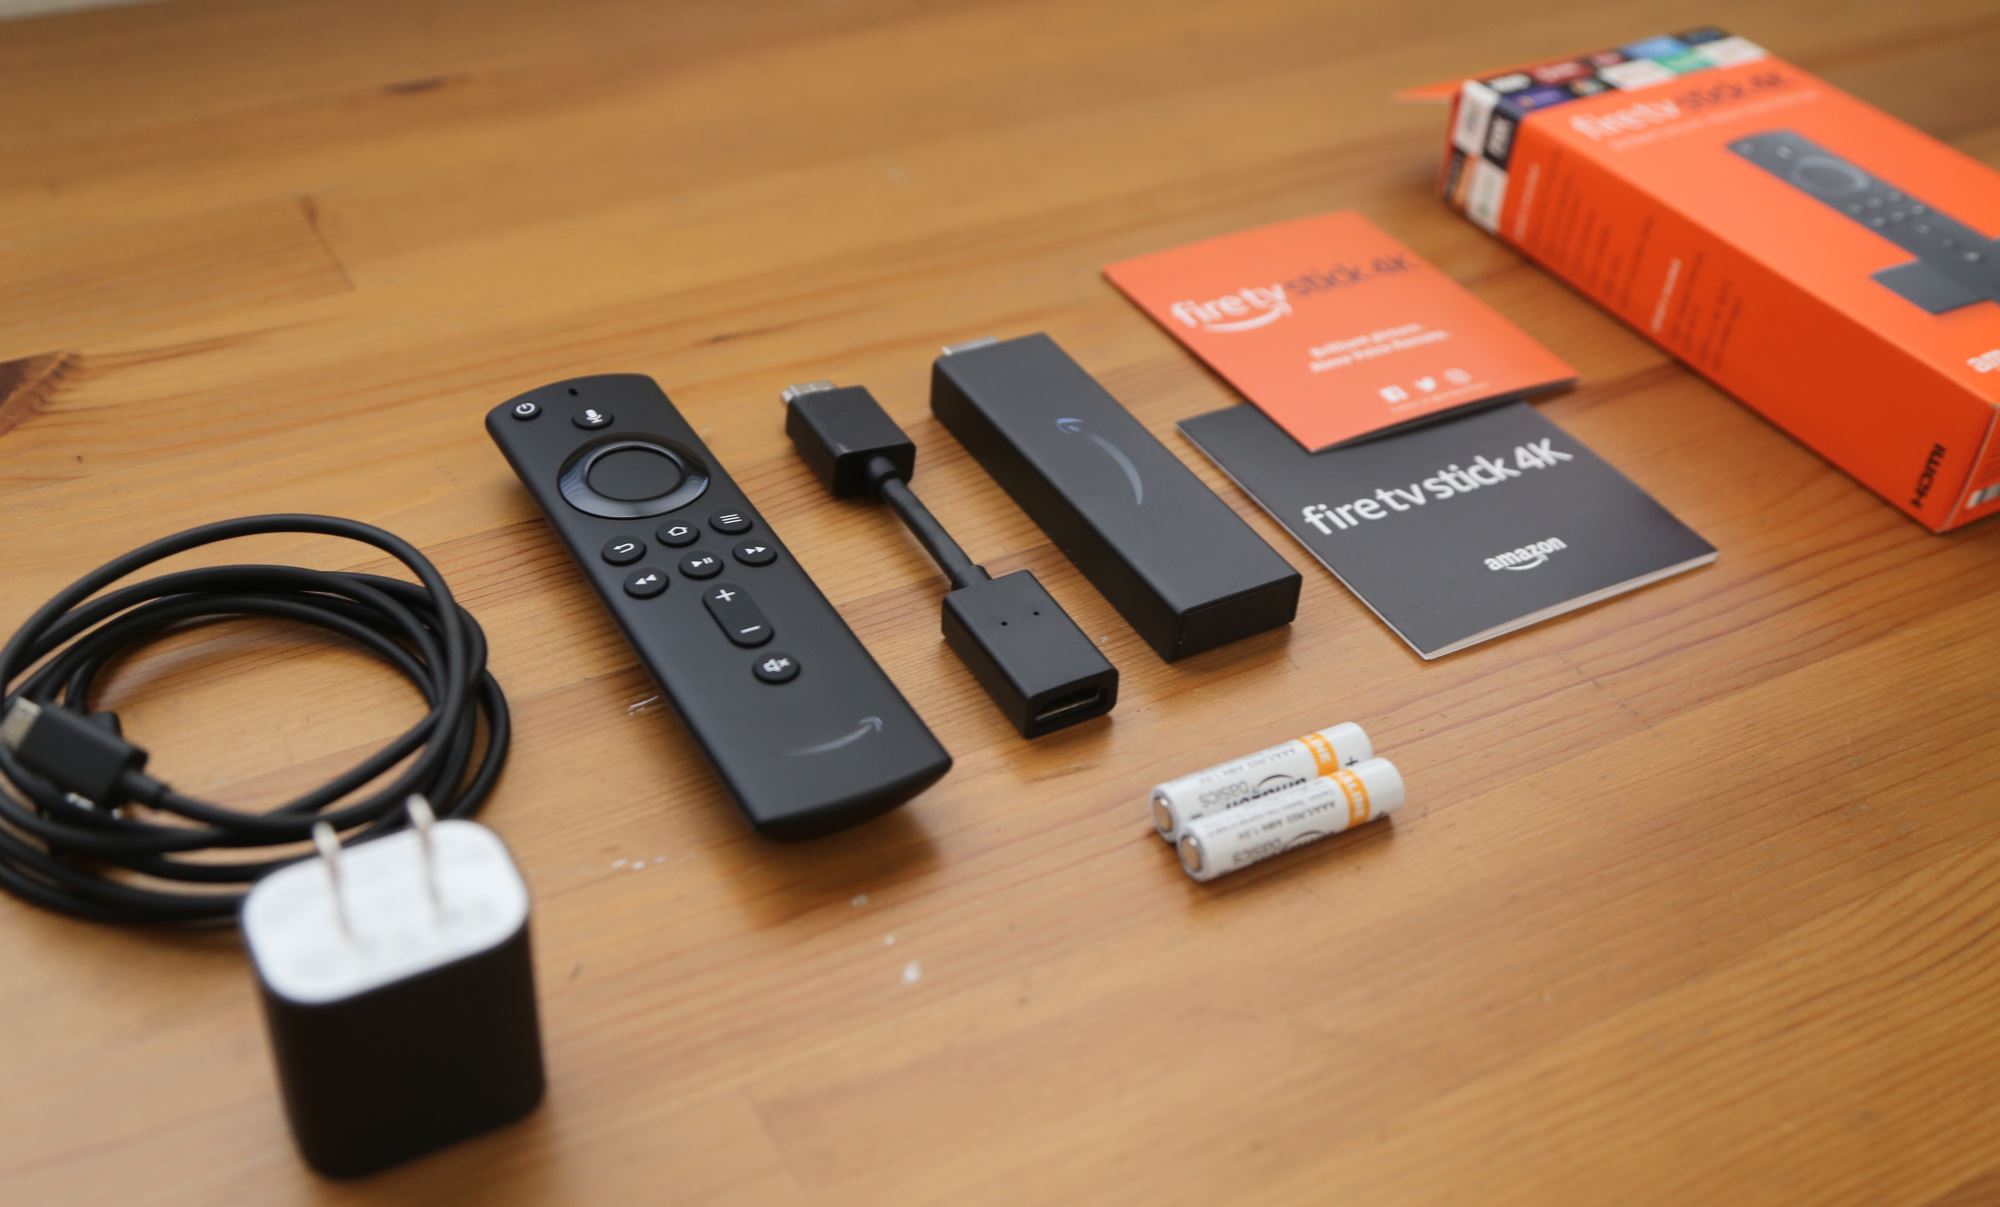 how to set up firestick on amazon